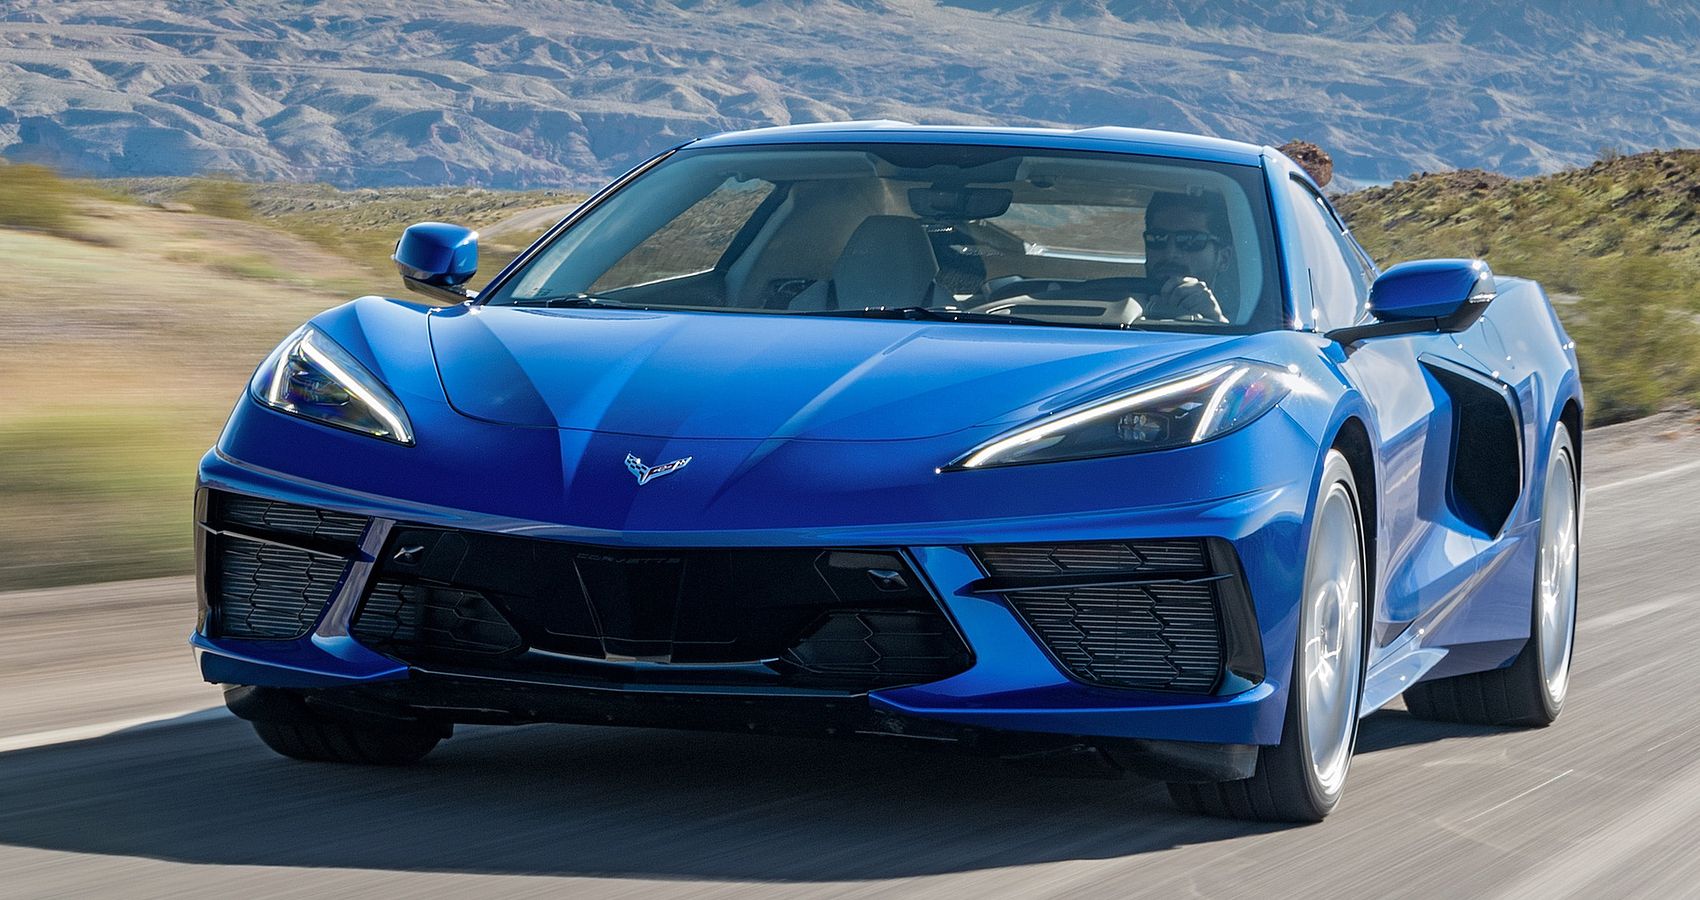 The front of a blue Corvette Stingray on the move